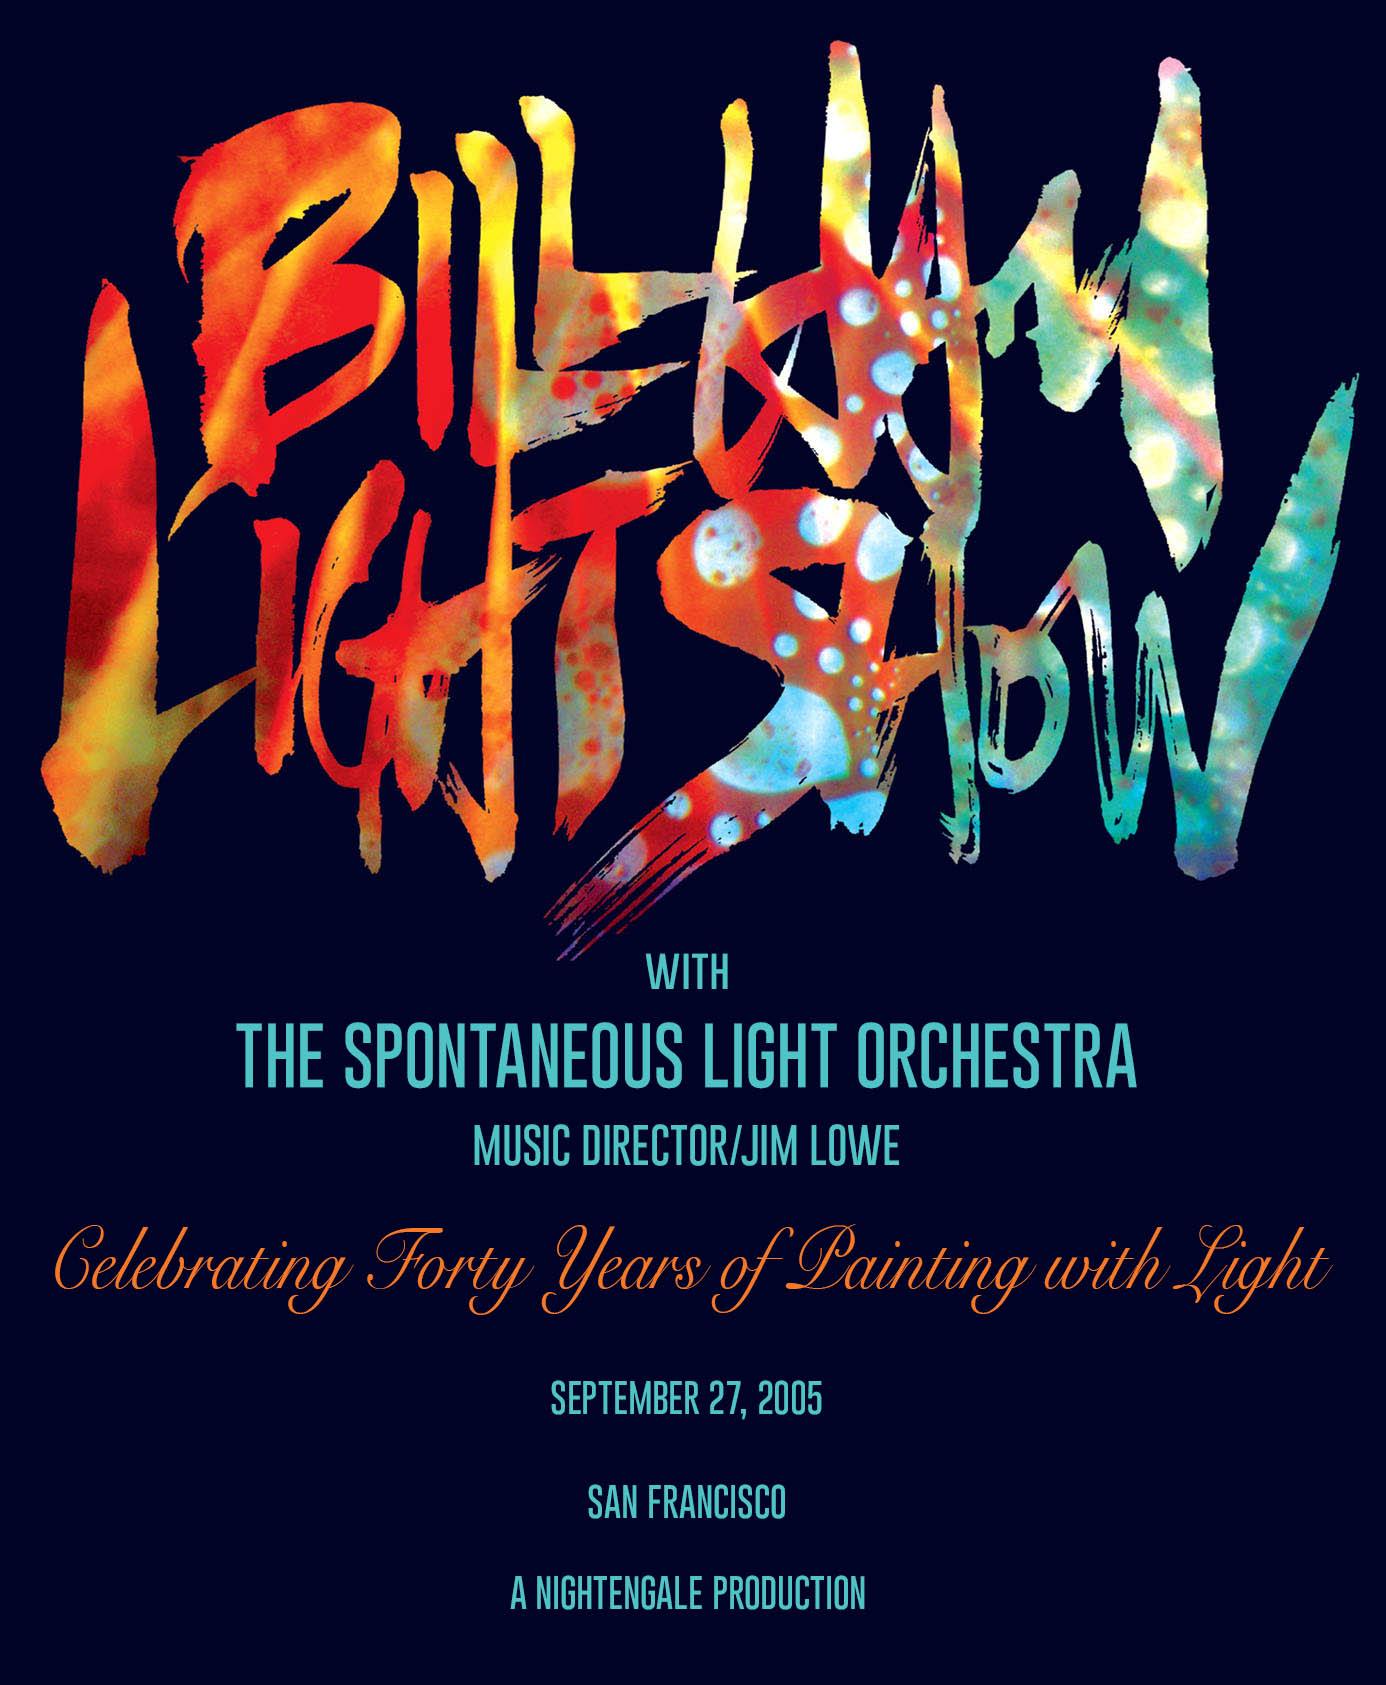 Bill Ham 40 years Anniv Lightshow Catalogue at Cobbs, San Francisco, catalog design and calligraphy by emi